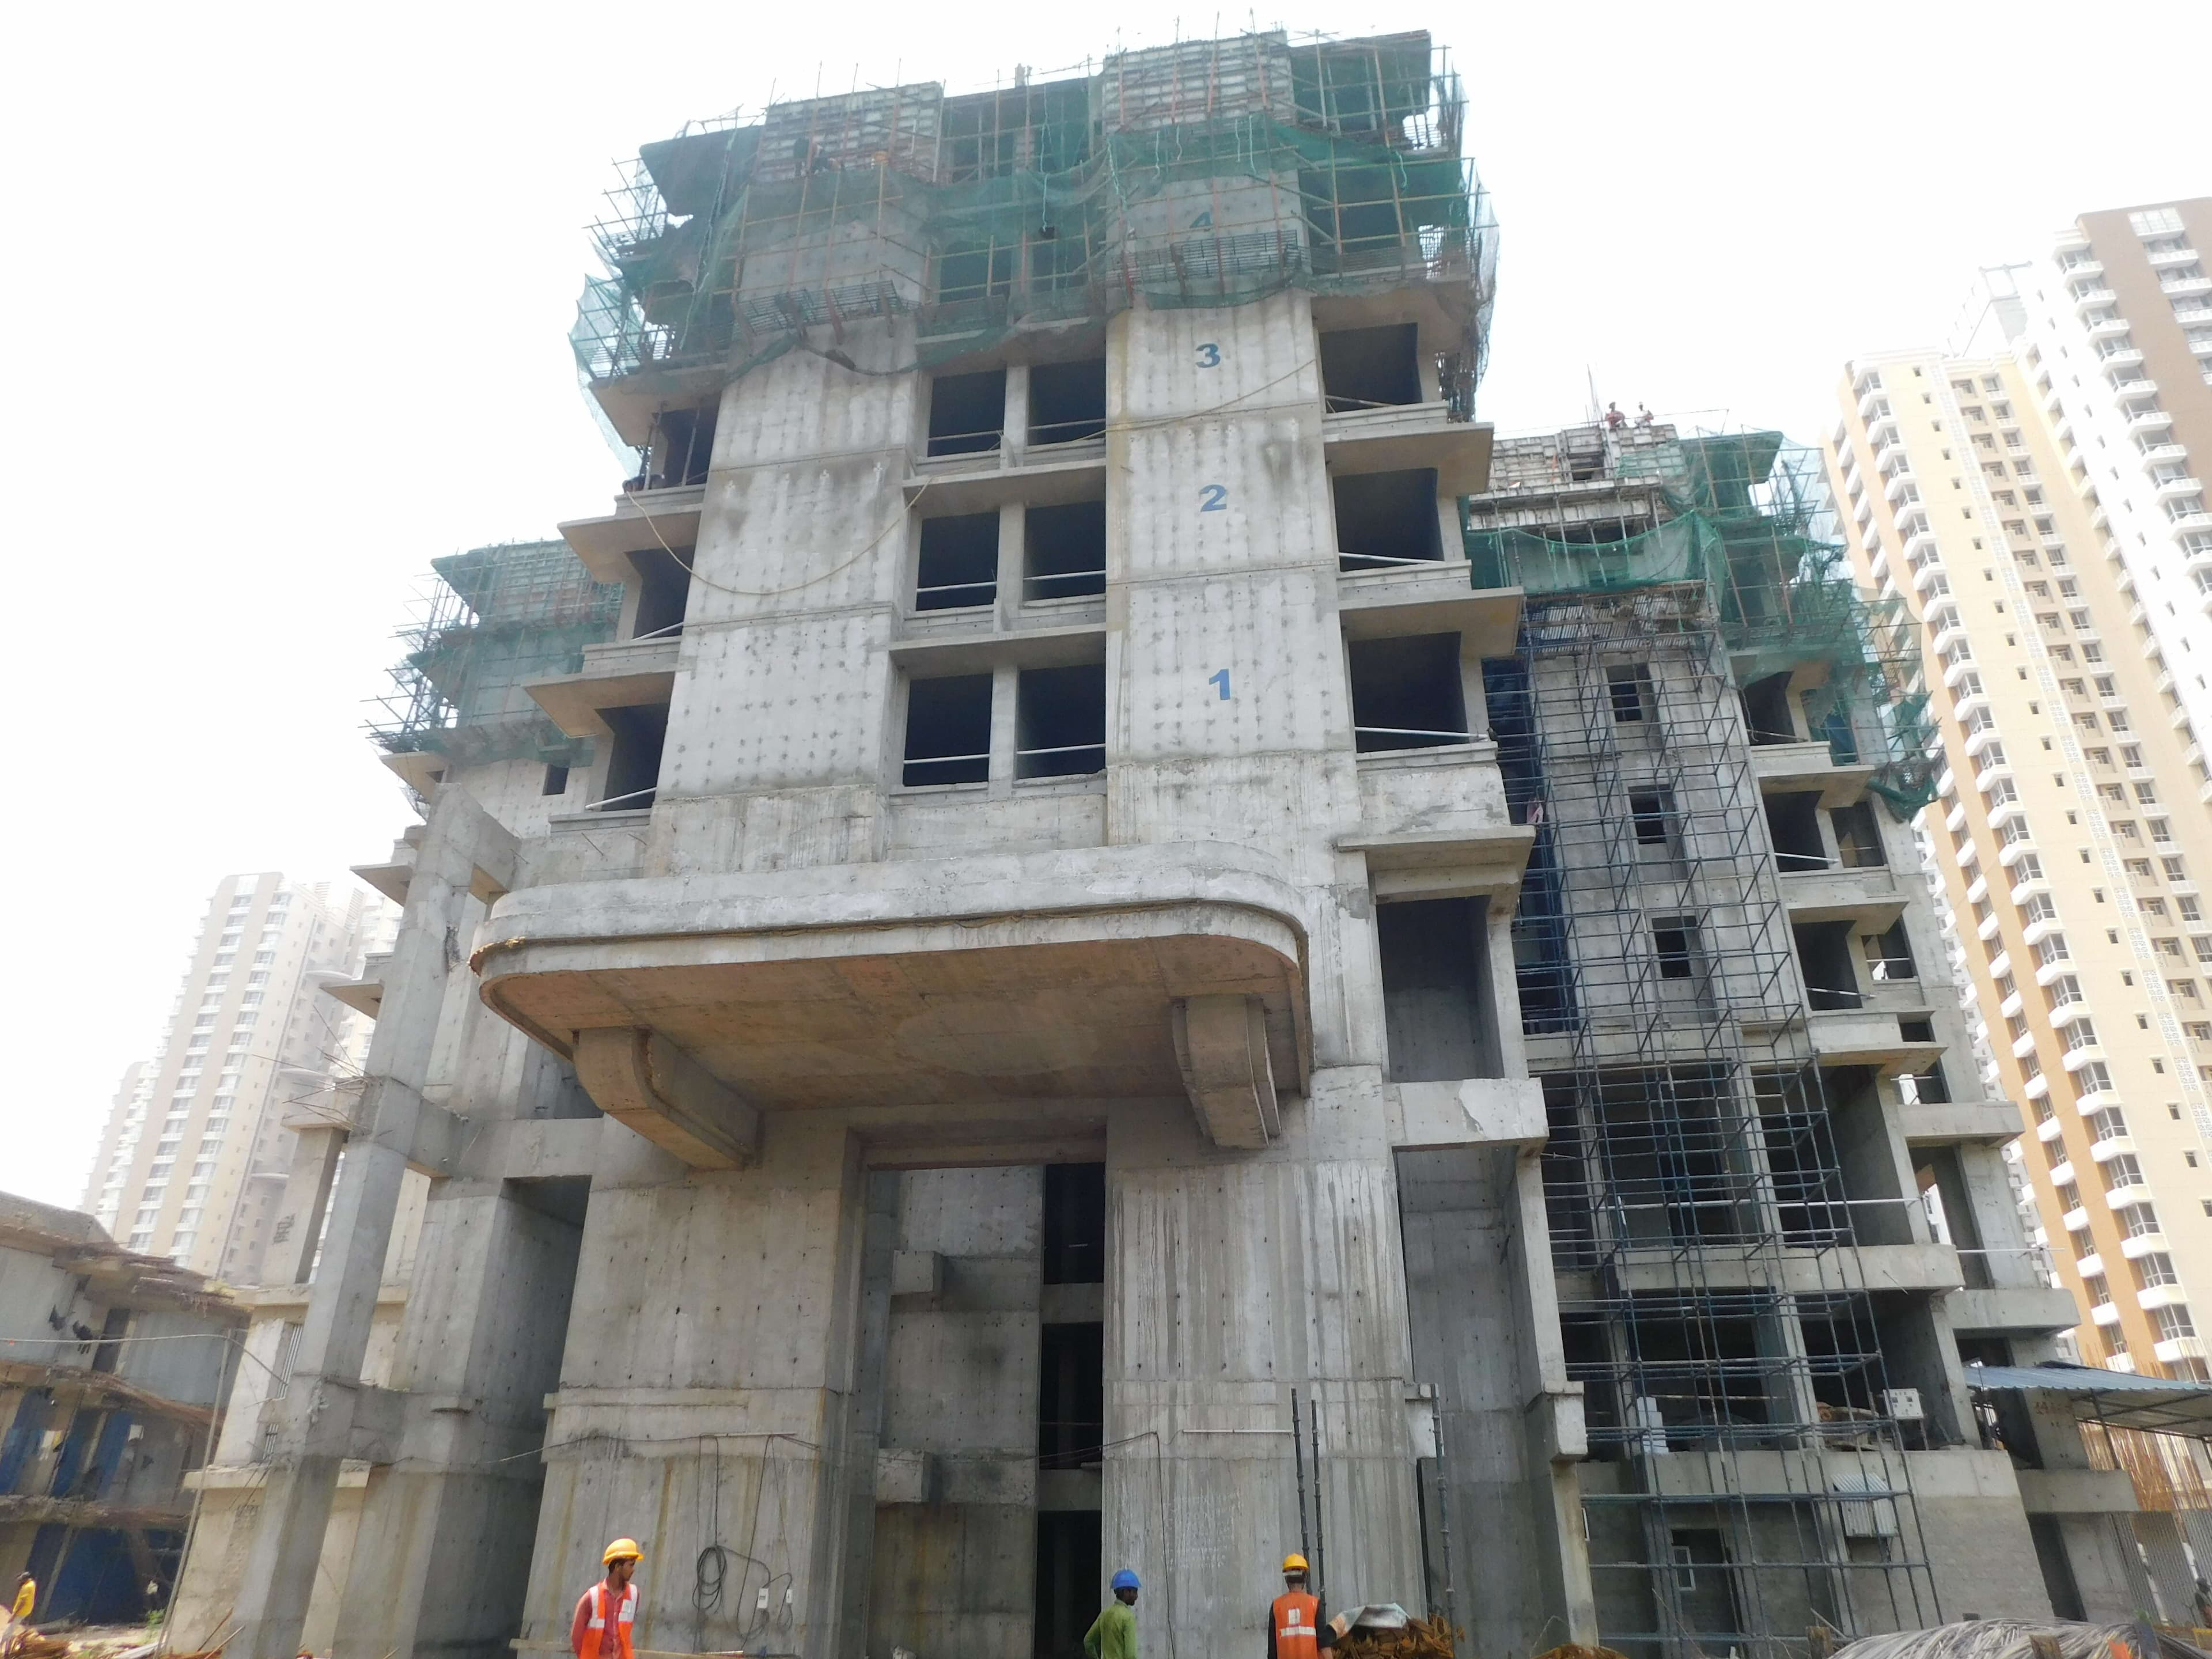 Sangam Tower 3 Completion of 5th Floor Roof Casting